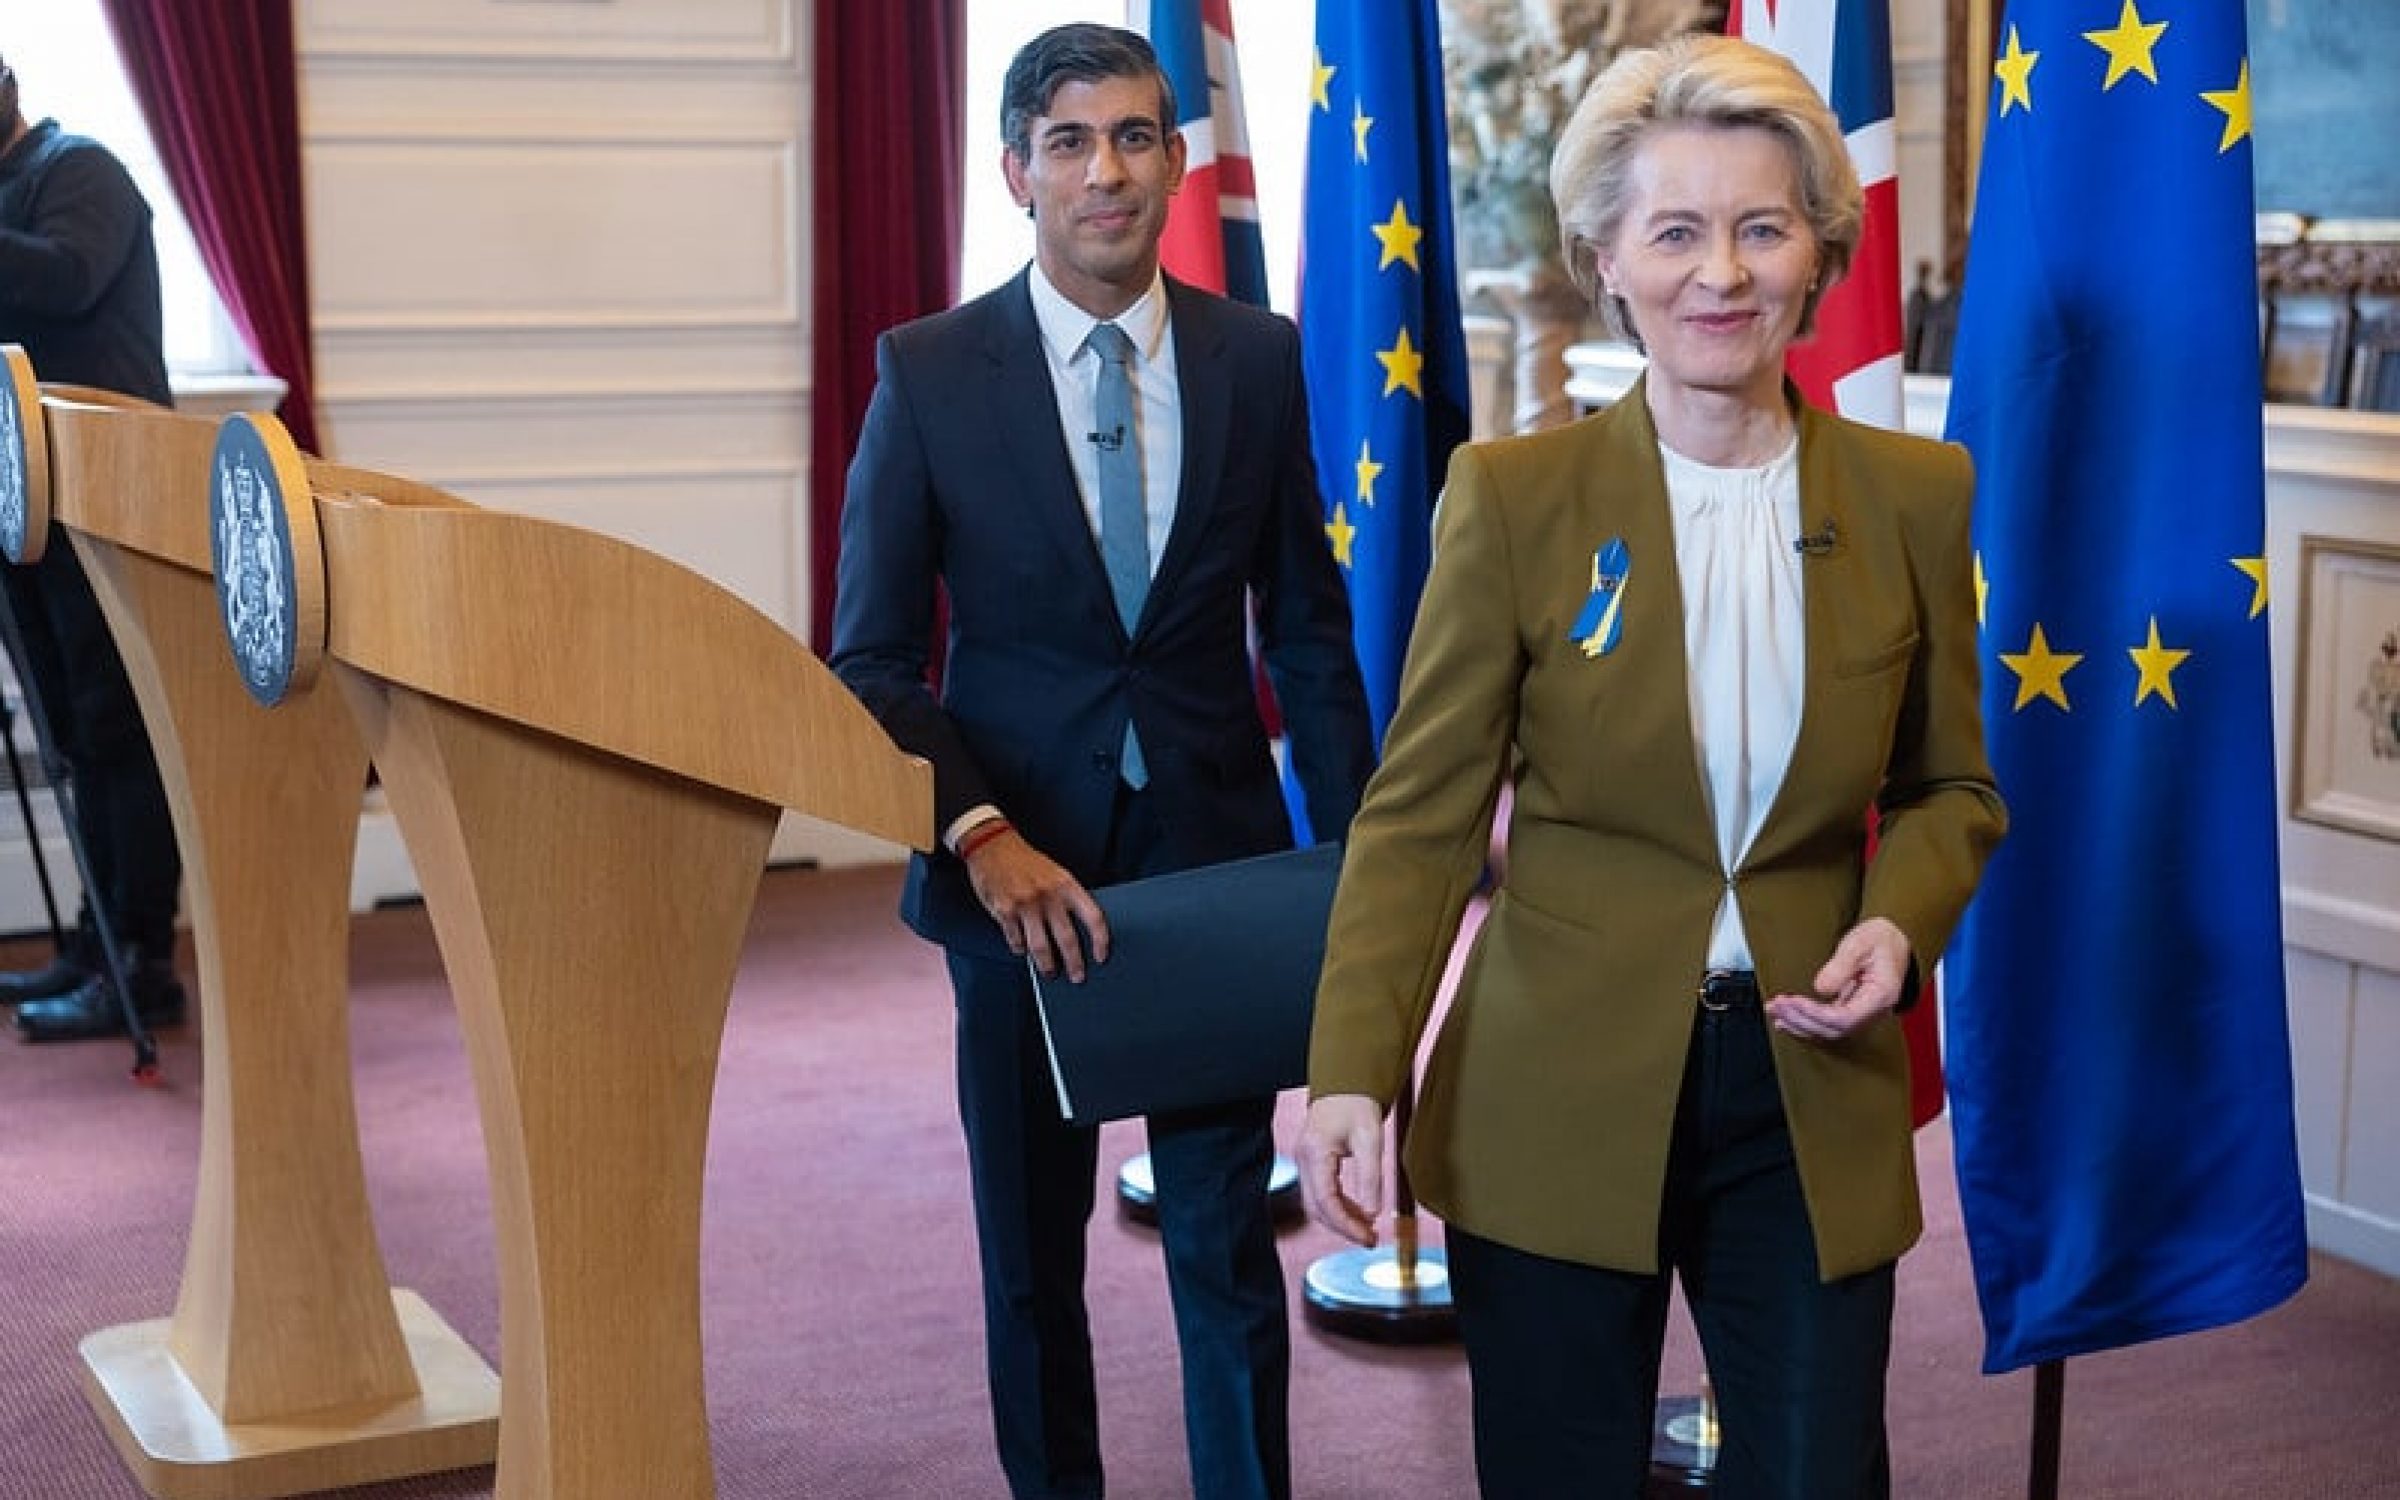 27/02/2023. Windsor, United Kingdom. The Prime Minister Rishi Sunak holds a joint press conference with the President of the European Commission Ursula von der Leyen in Windsor Guildhall.